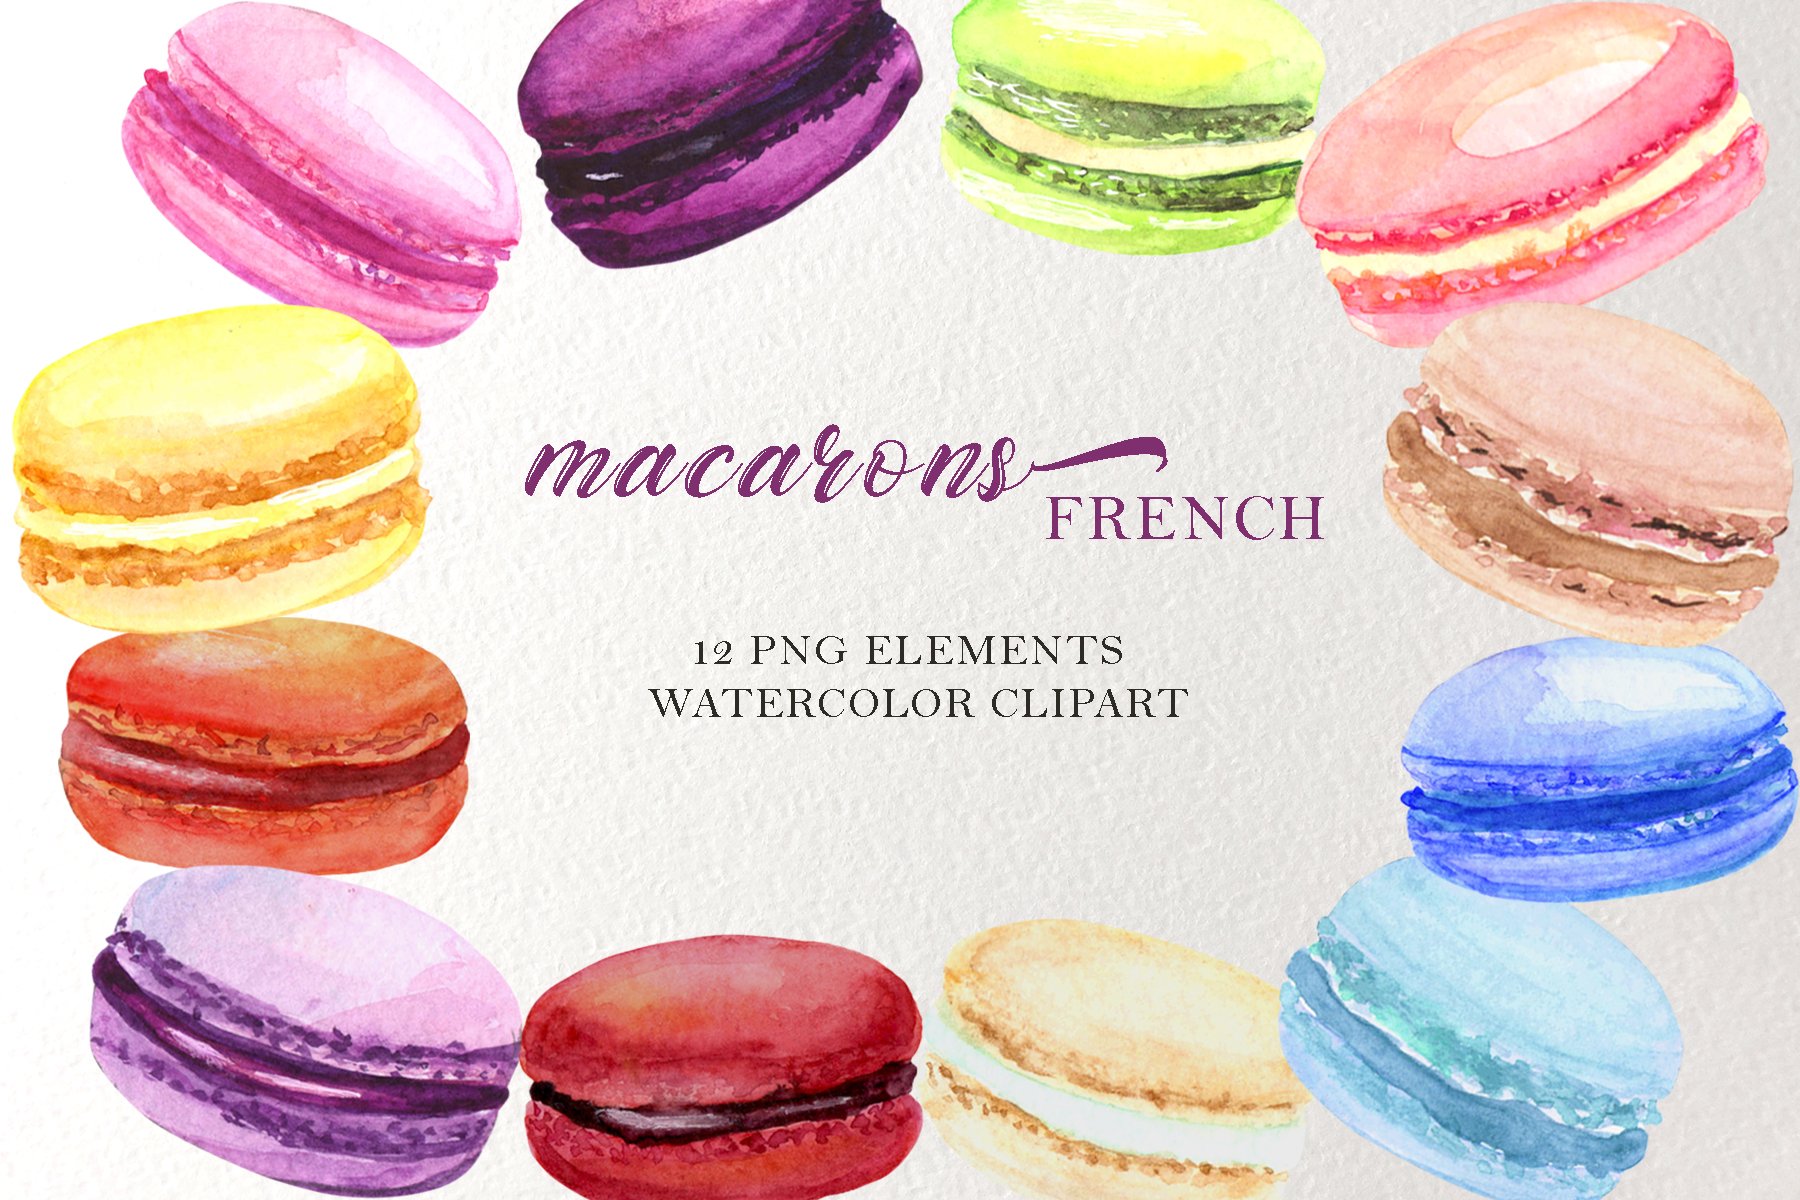 Nice colorful macaroons collection.